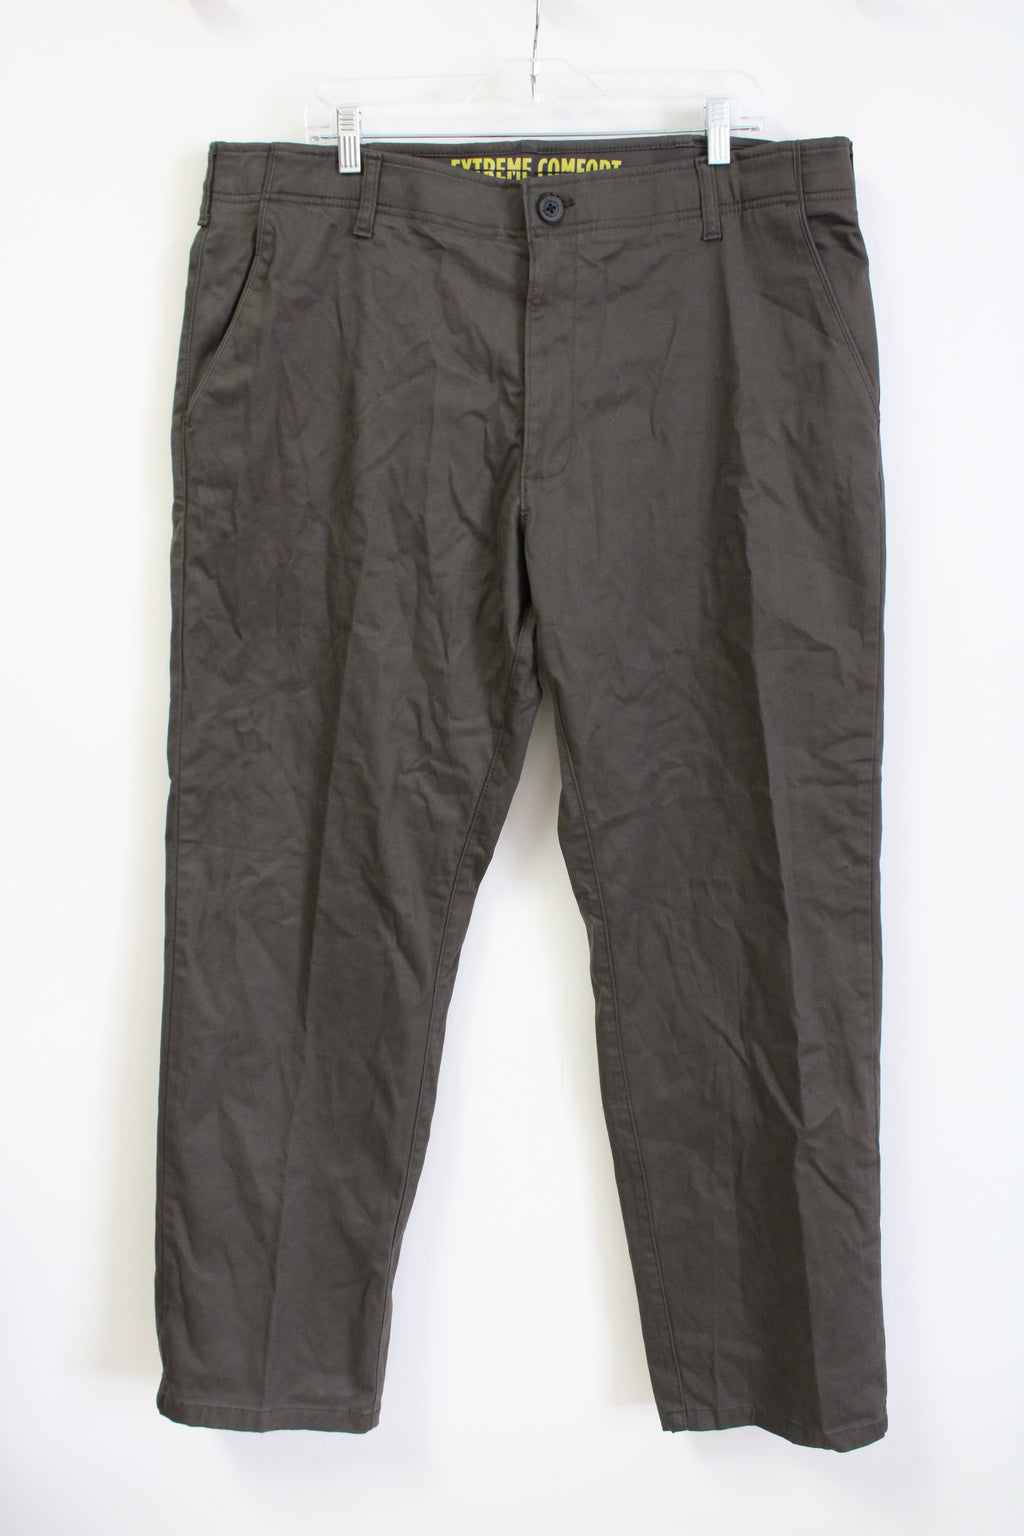 Lee Performance Series Extreme Comfort Straight Fit Dark Green Pant | 40X32